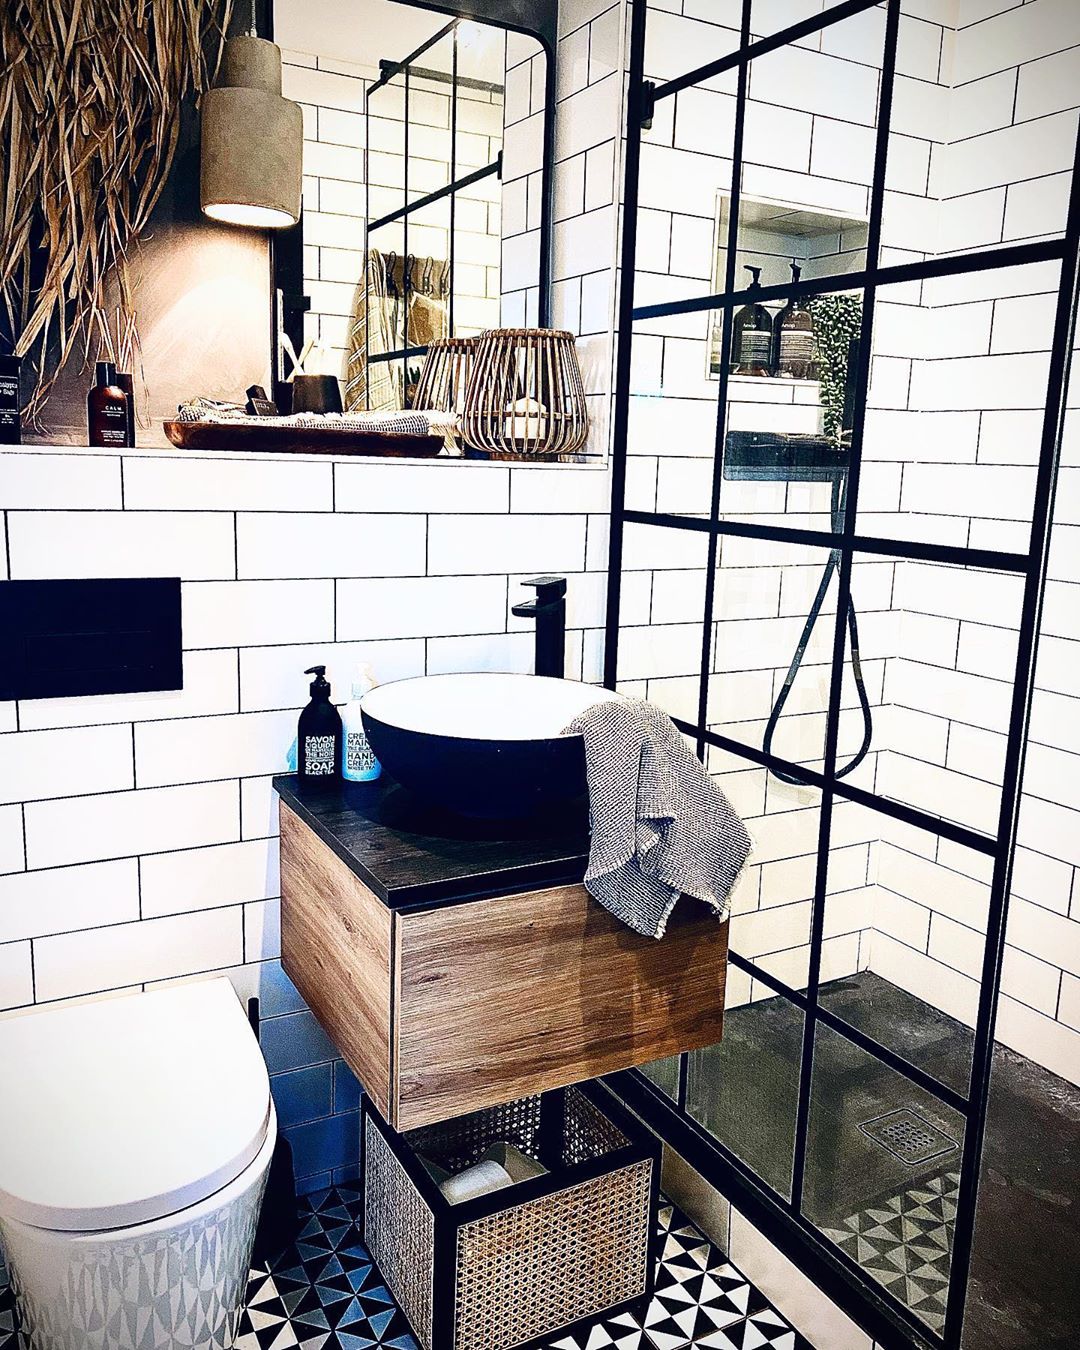 Four of the Greatest Gridded Bathroom Designs of 2020